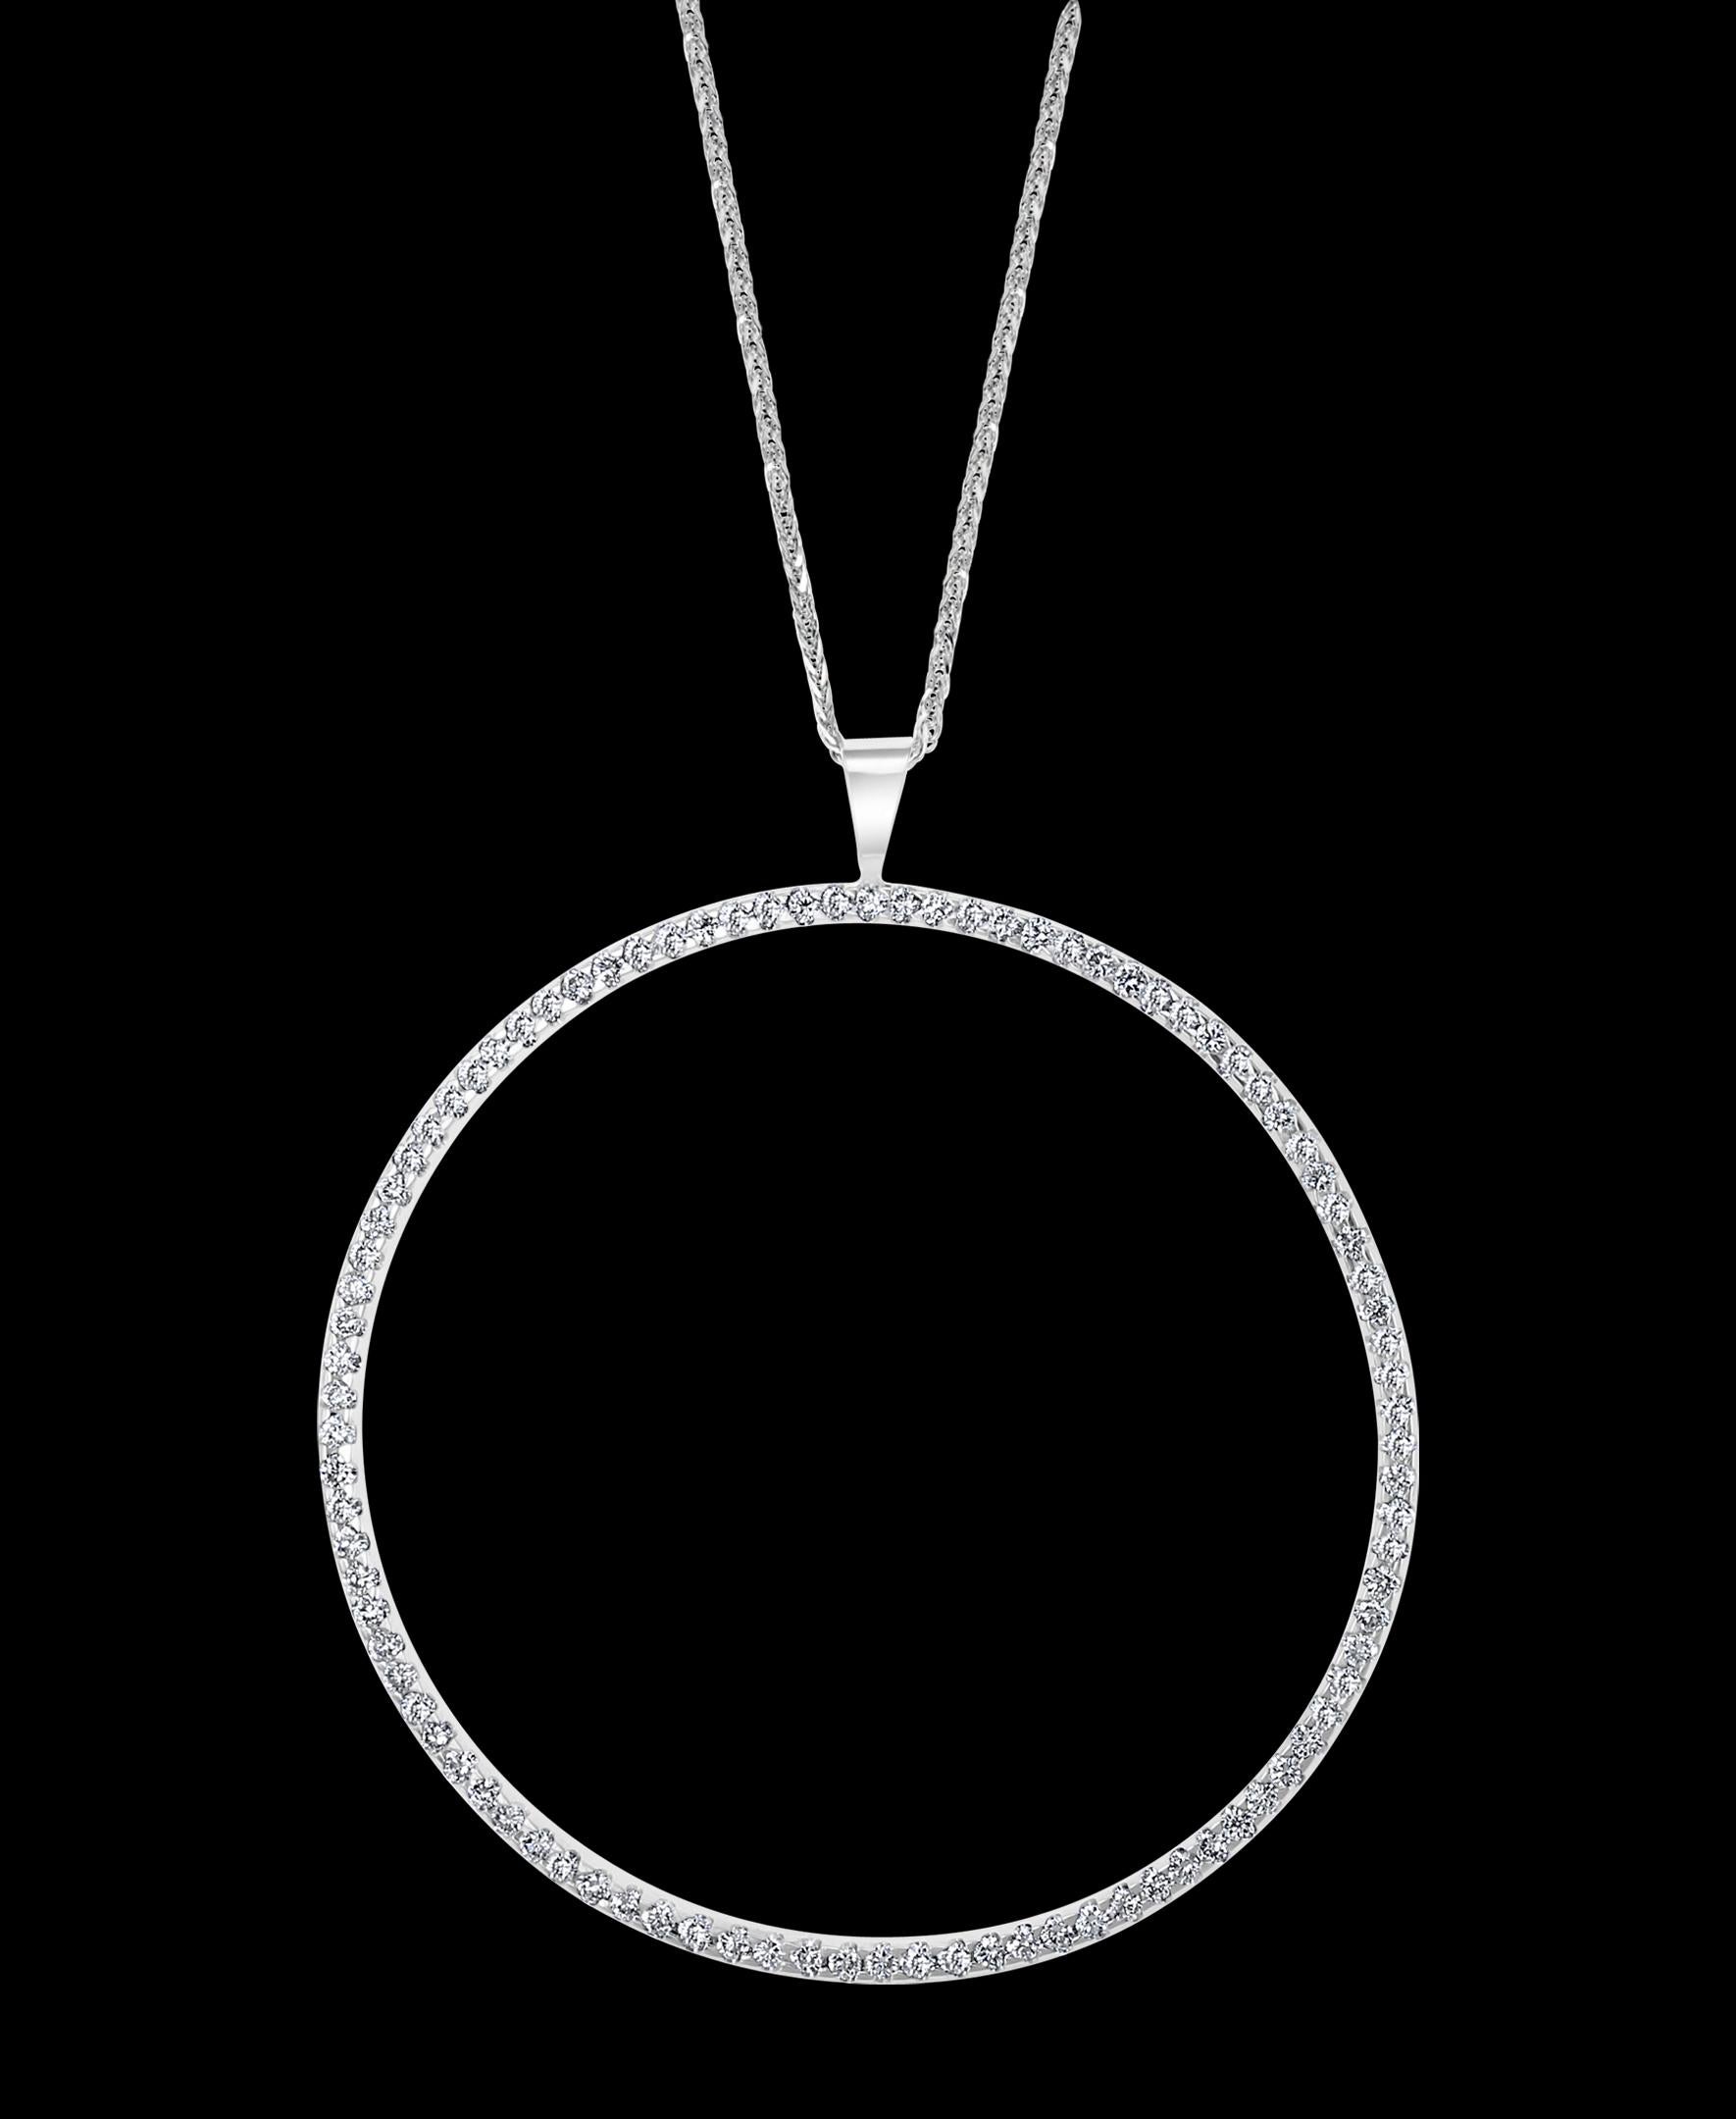 Large Diamond Circle Pendant/ Necklace 18 K White Gold With 14 K Gold Chain
Diamond Weight  approximately 2.5 to 3.0 Carats
Diamonds are eye clean, Fine  quality with lots of shine
18 K gold Weight  6 Grams
Very affordable price for this particular